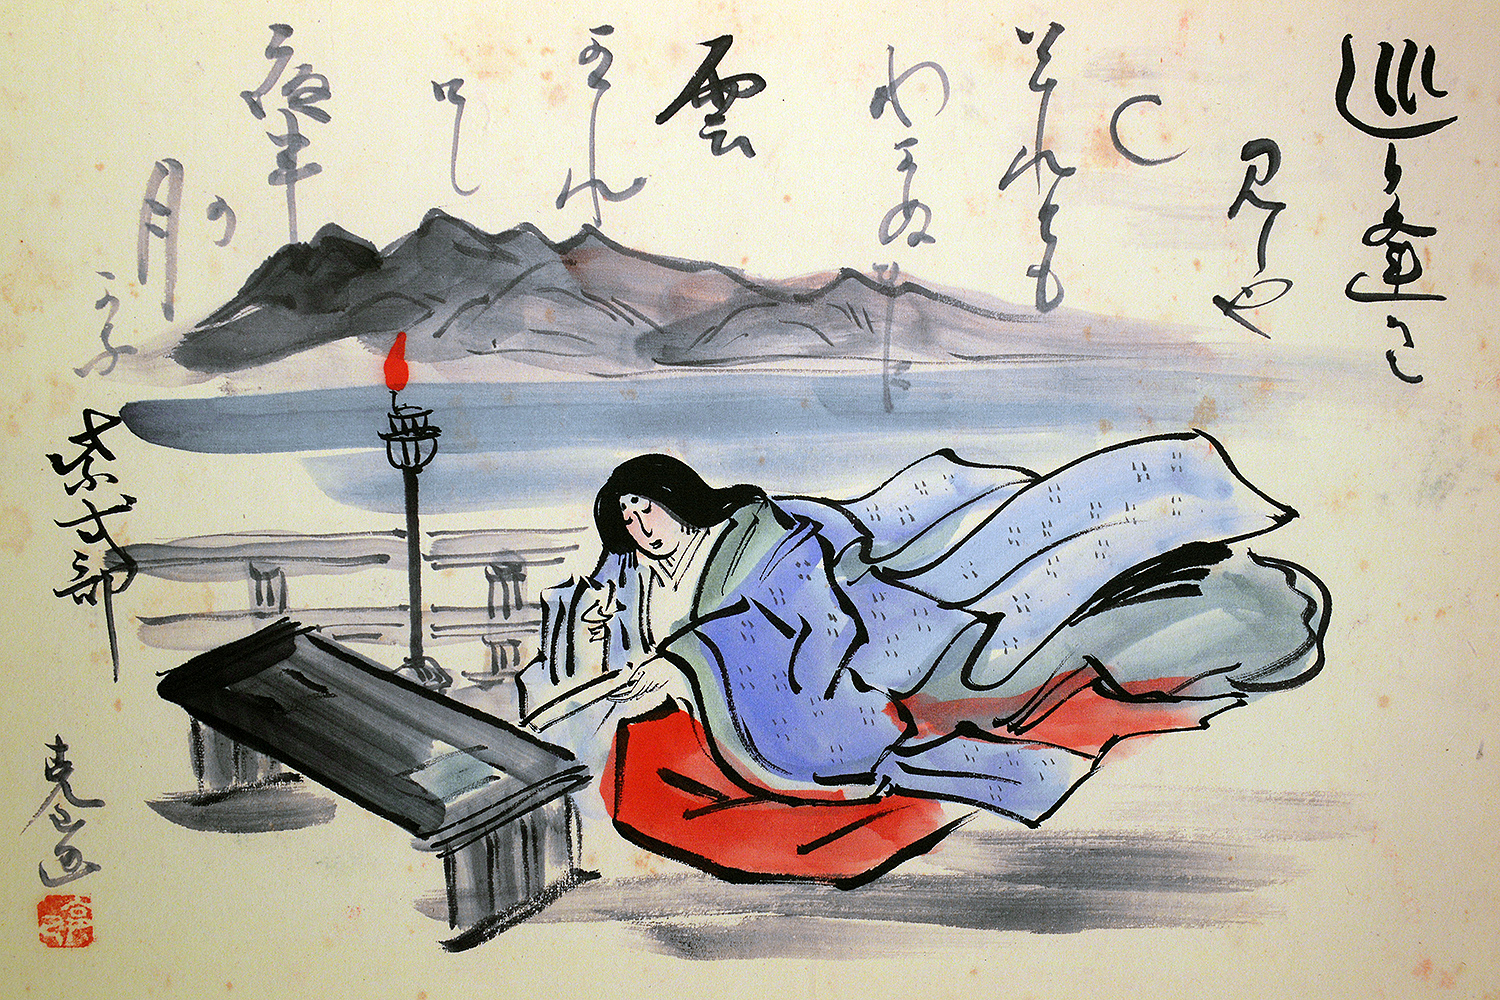 The illustration “Lady Murasaki (1928)” depicts Lady Murasaki Shikibu, one of the key literary figures during the Heian period (794-1185), a time of great literary accomplishment in Japanese history. The artist has depicted Lady Murasaki at a writing desk with her colorful court costume spread around her with misty mountains in the background. 